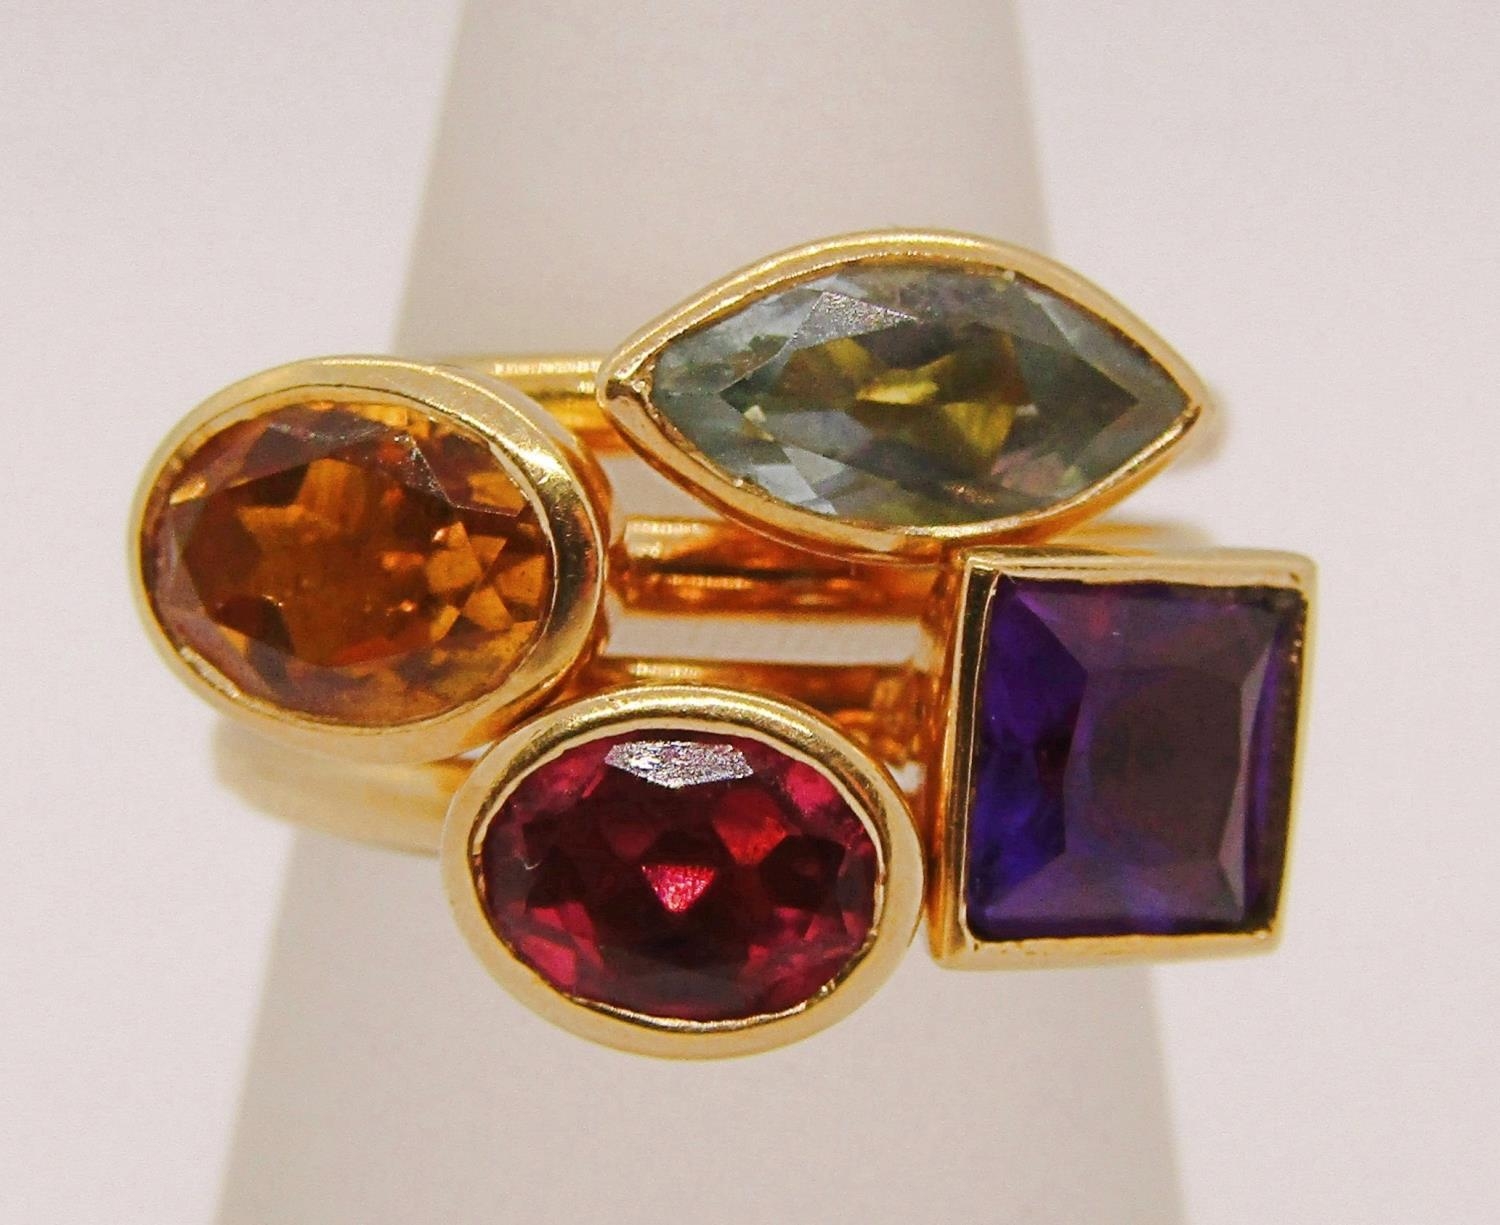 Four 18ct gem set stacking rings by Pascal Jewellery (now Annoushka), citrine, amethyst, topaz and